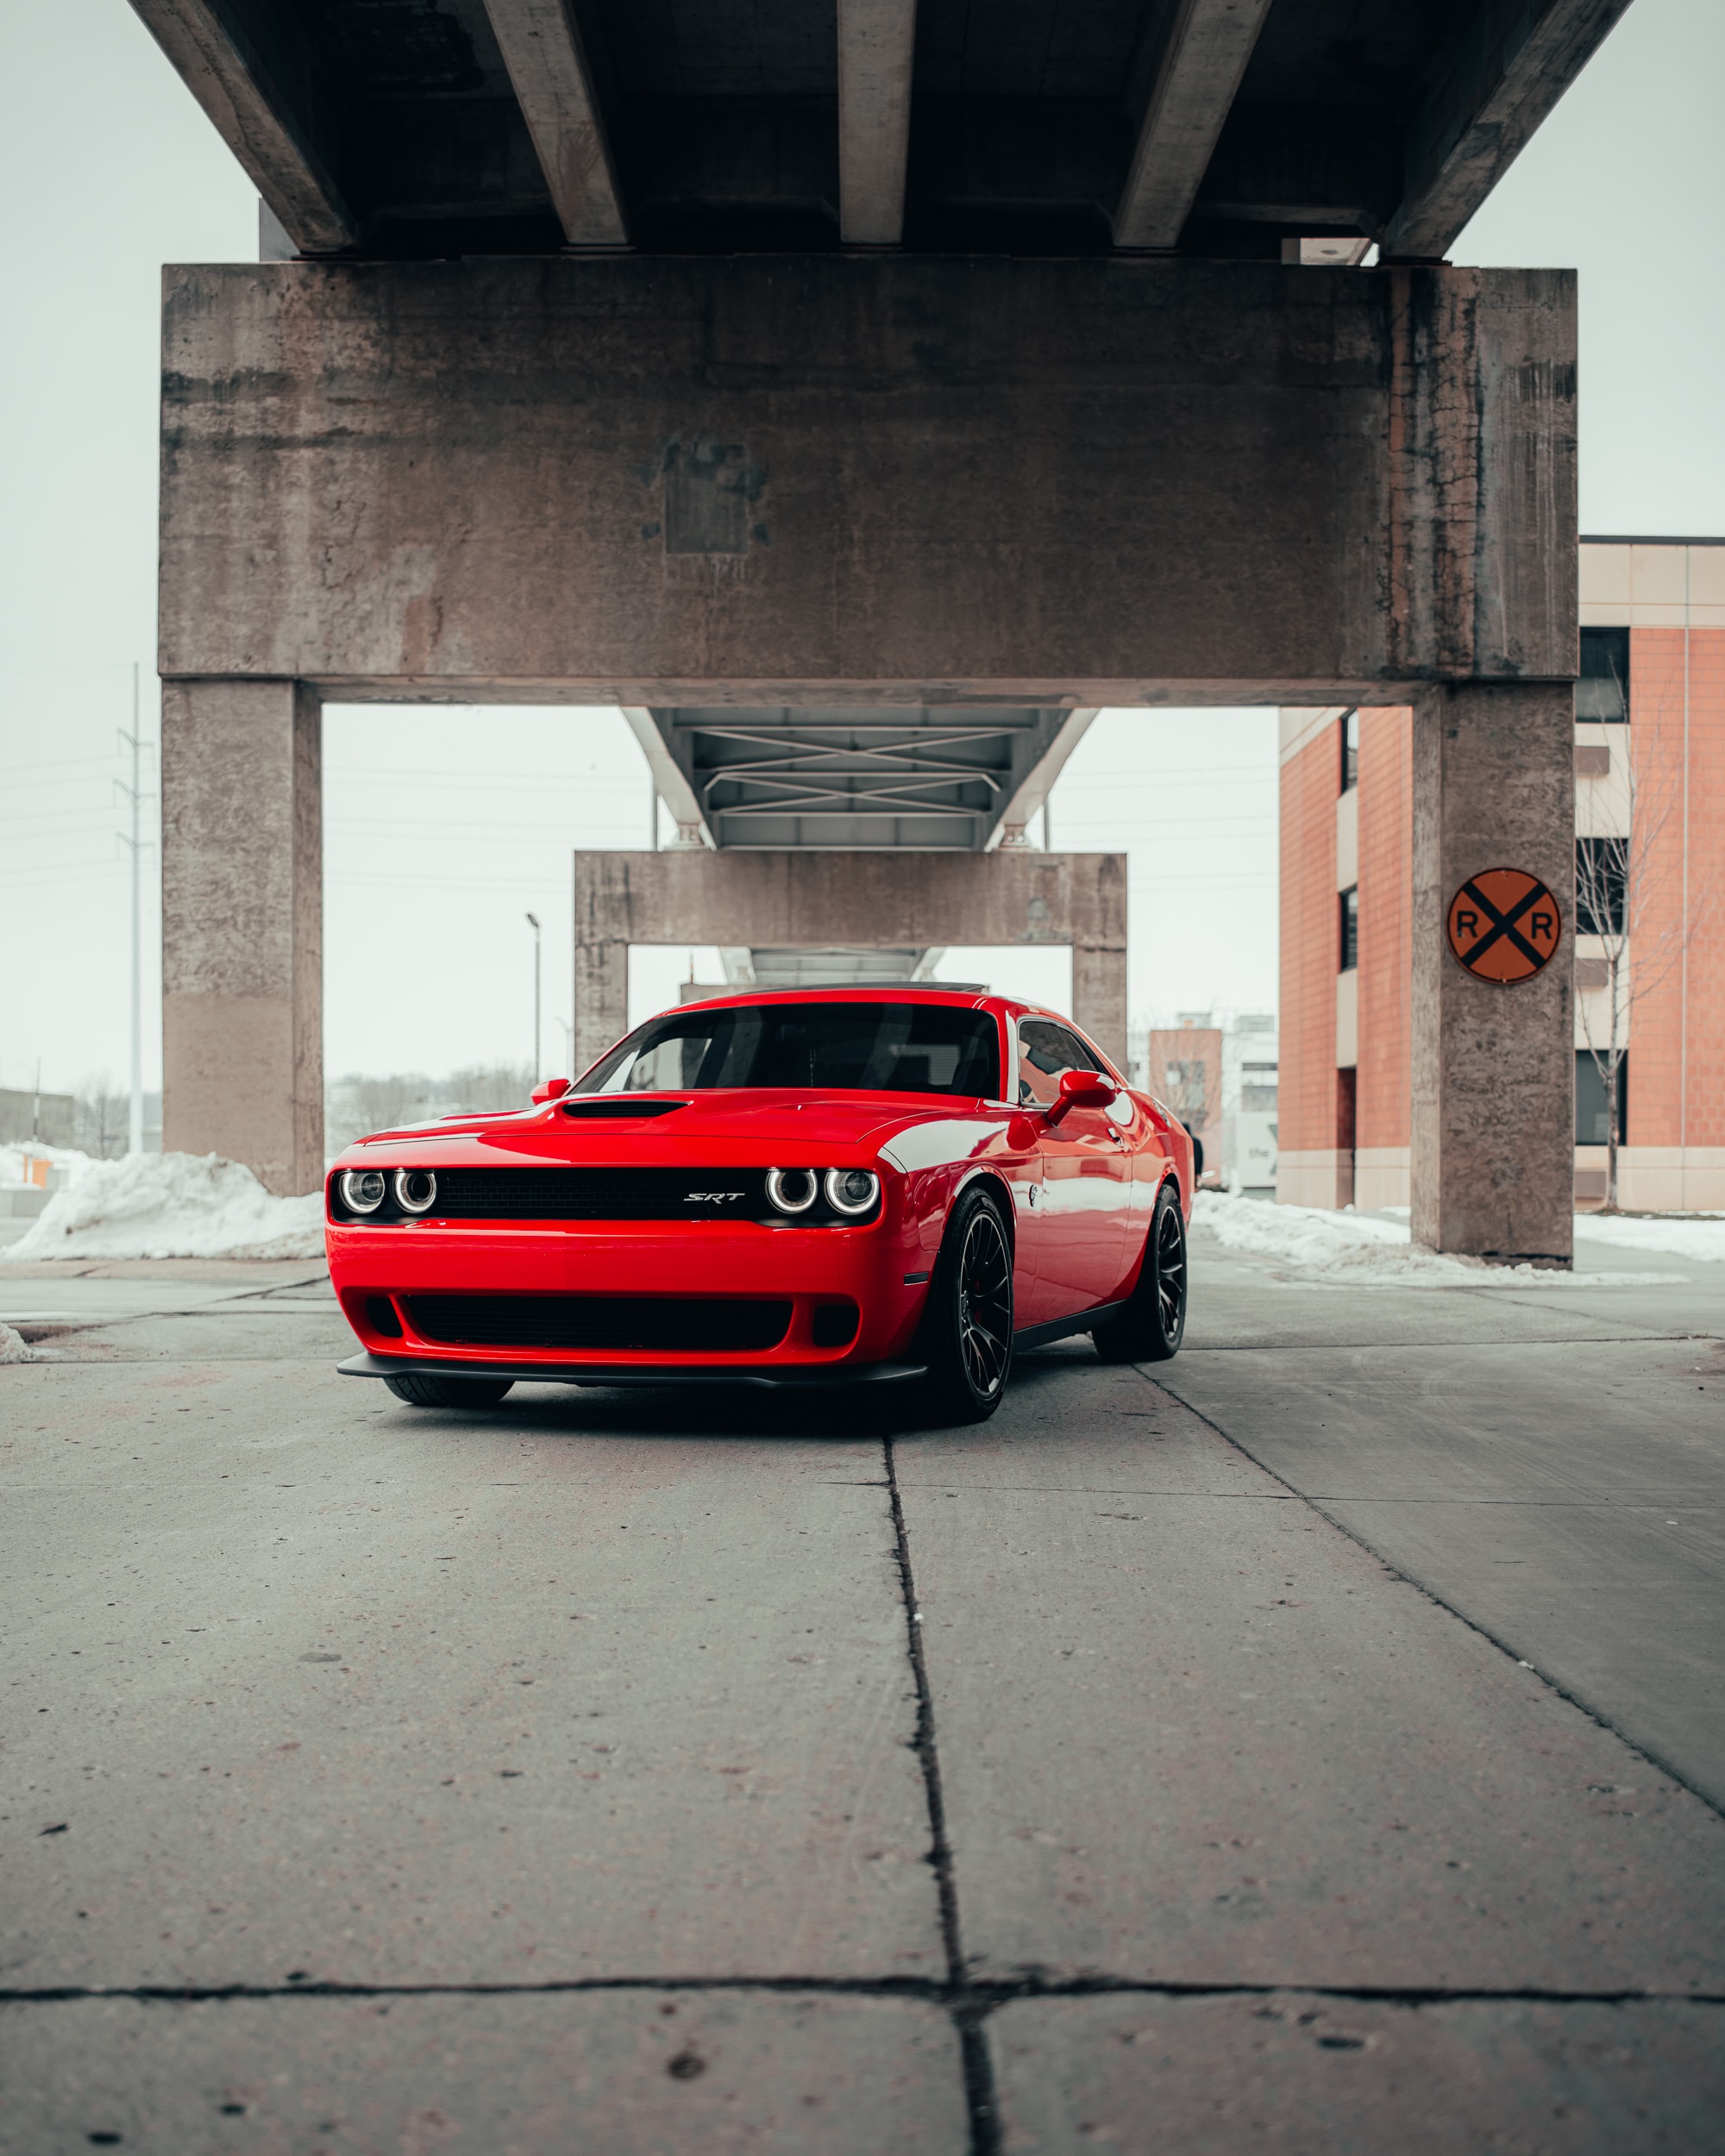 HD wallpaper car, sports car, cars, dodge, front view, sports, red, dodge challenger srt